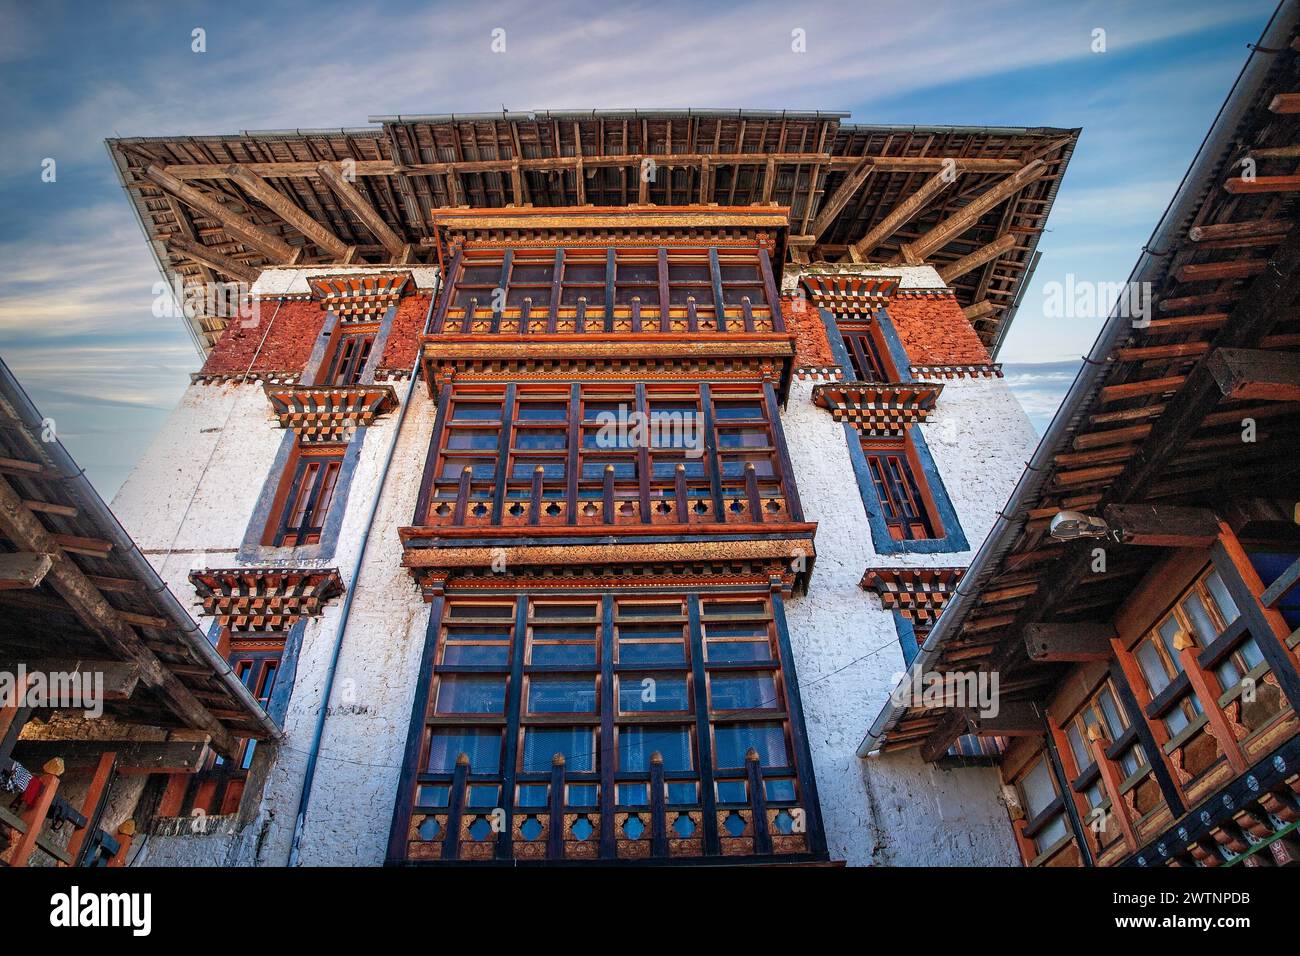 Tamshing Goemba in Bhutan, Asia is formally the Tamshing Lhendup Chholing (Temple of the Good Message), is 5km from Jakar. Stock Photo